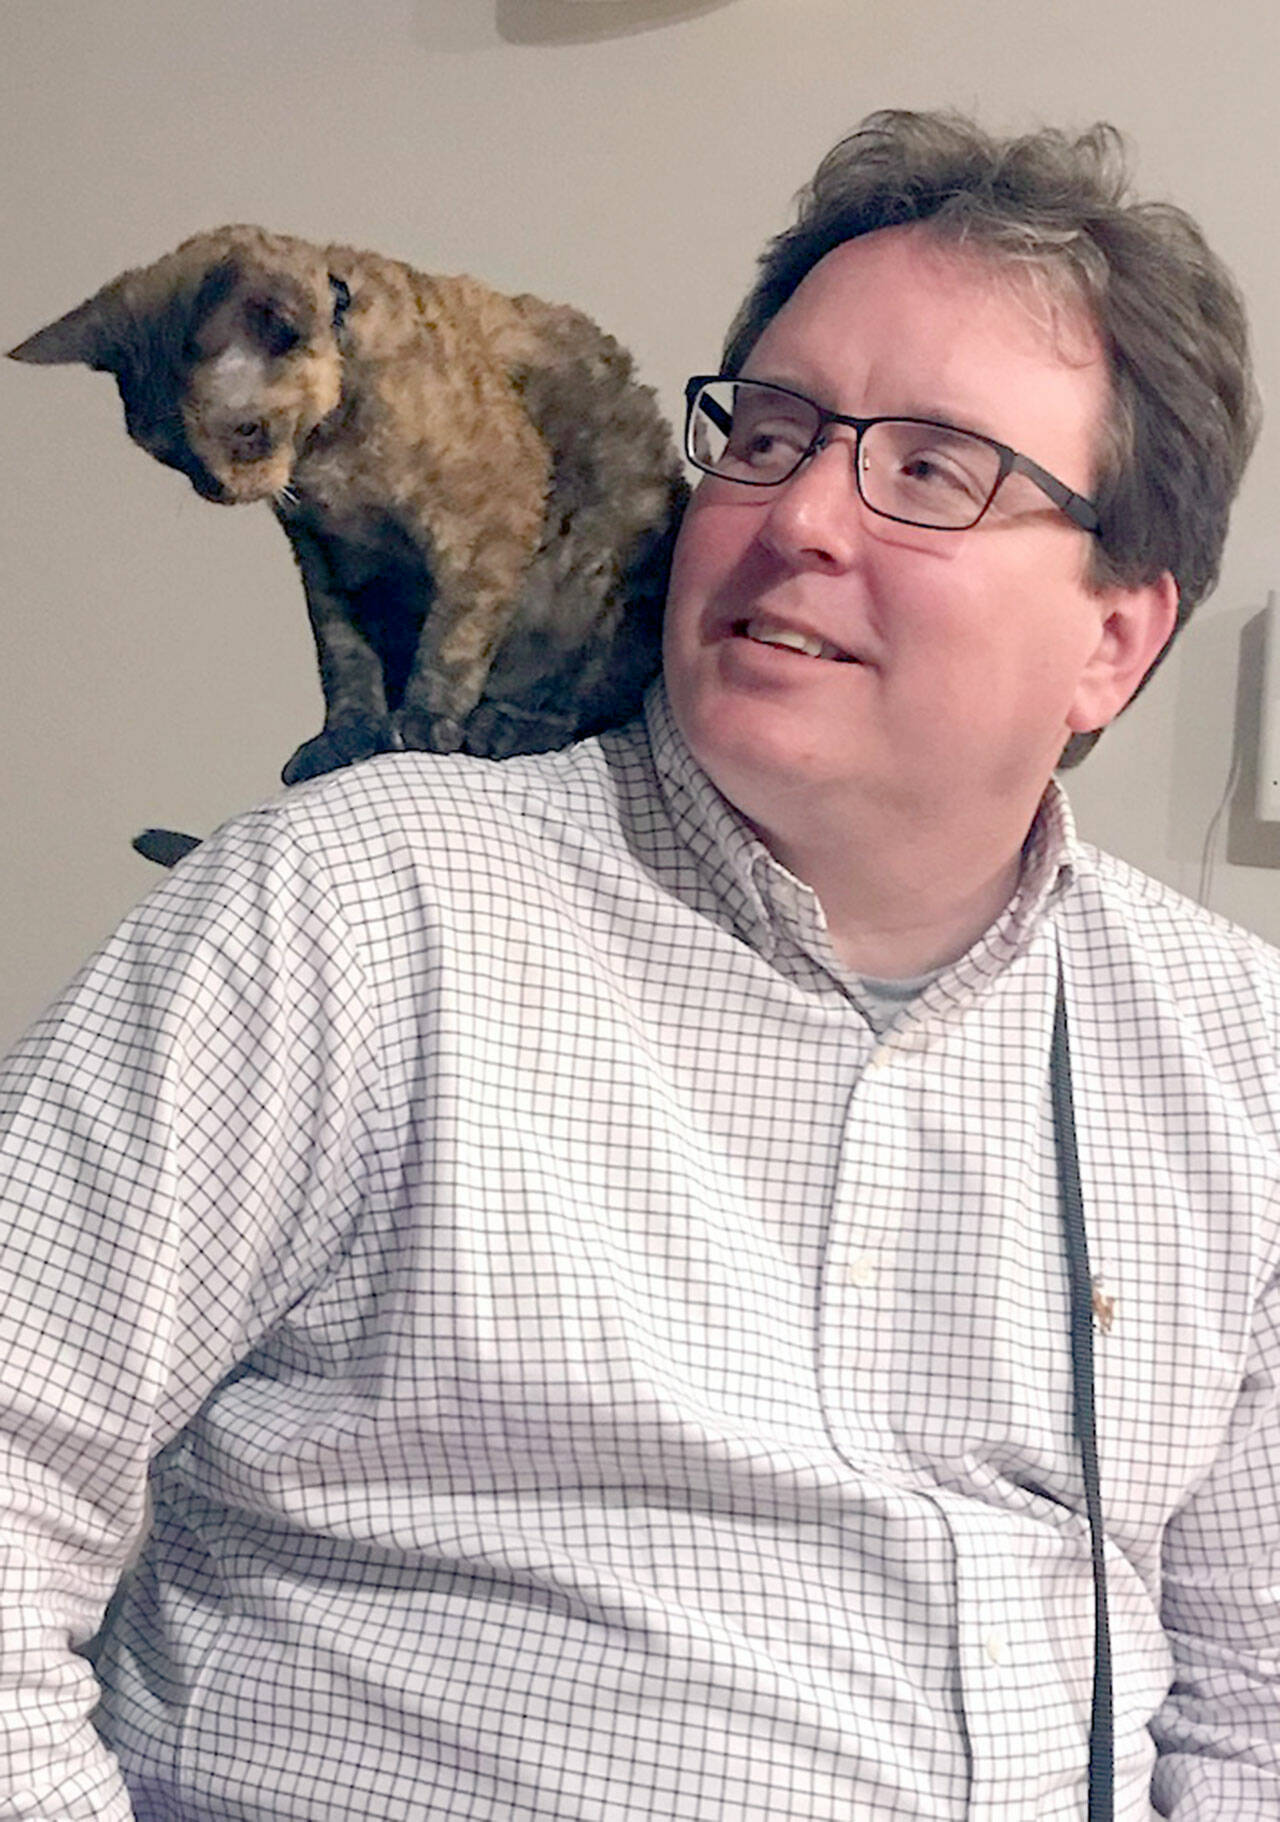 Ryan Malane, pictured with one of his cats, vice president and co-owner of Black Ball Ferry Line, died on June 13. Submitted photo